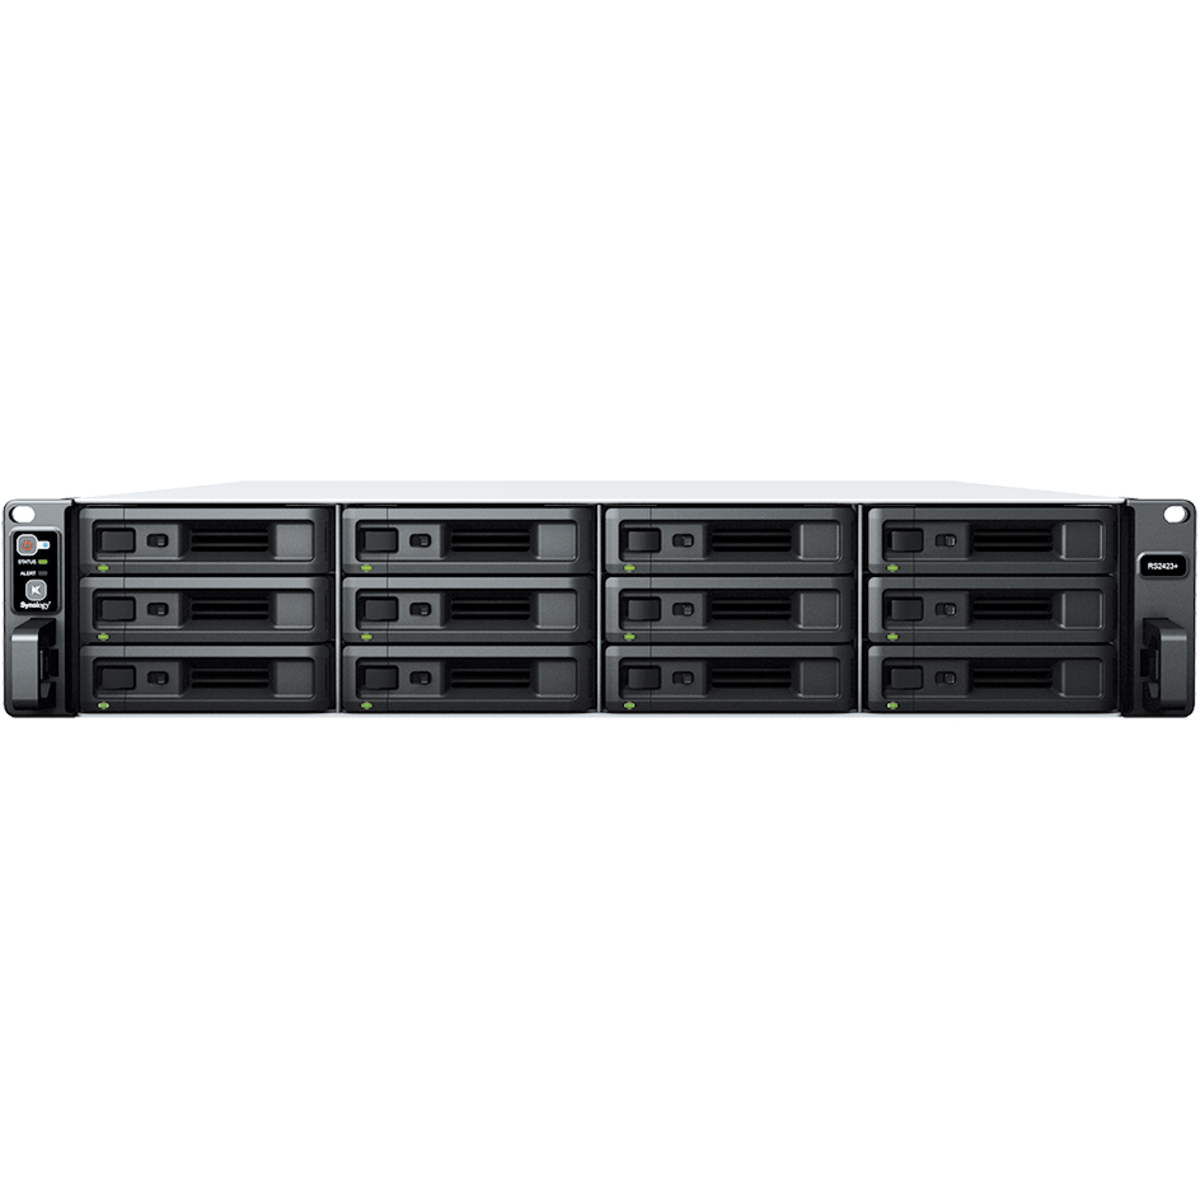 buy Synology RackStation RS2423+ 96tb RackMount NAS - Network Attached Storage Device 12x8000gb Seagate IronWolf Pro ST8000NT001 3.5 7200rpm SATA 6Gb/s HDD NAS Class Drives Installed - Burn-In Tested - ON SALE - nas headquarters buy network attached storage server device das new raid-5 free shipping simply usa RackStation RS2423+